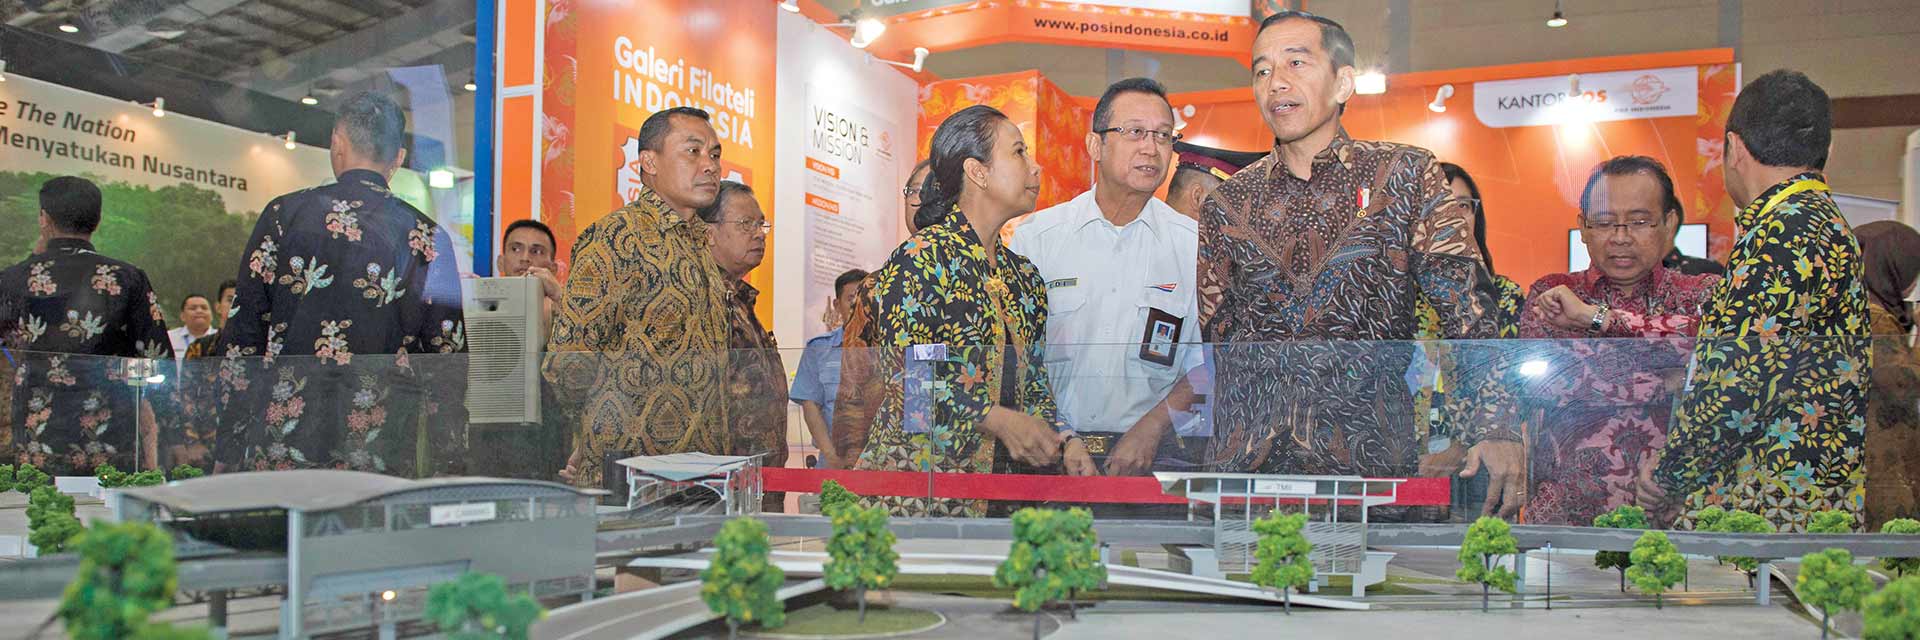 Indonesia Business and Development Expo